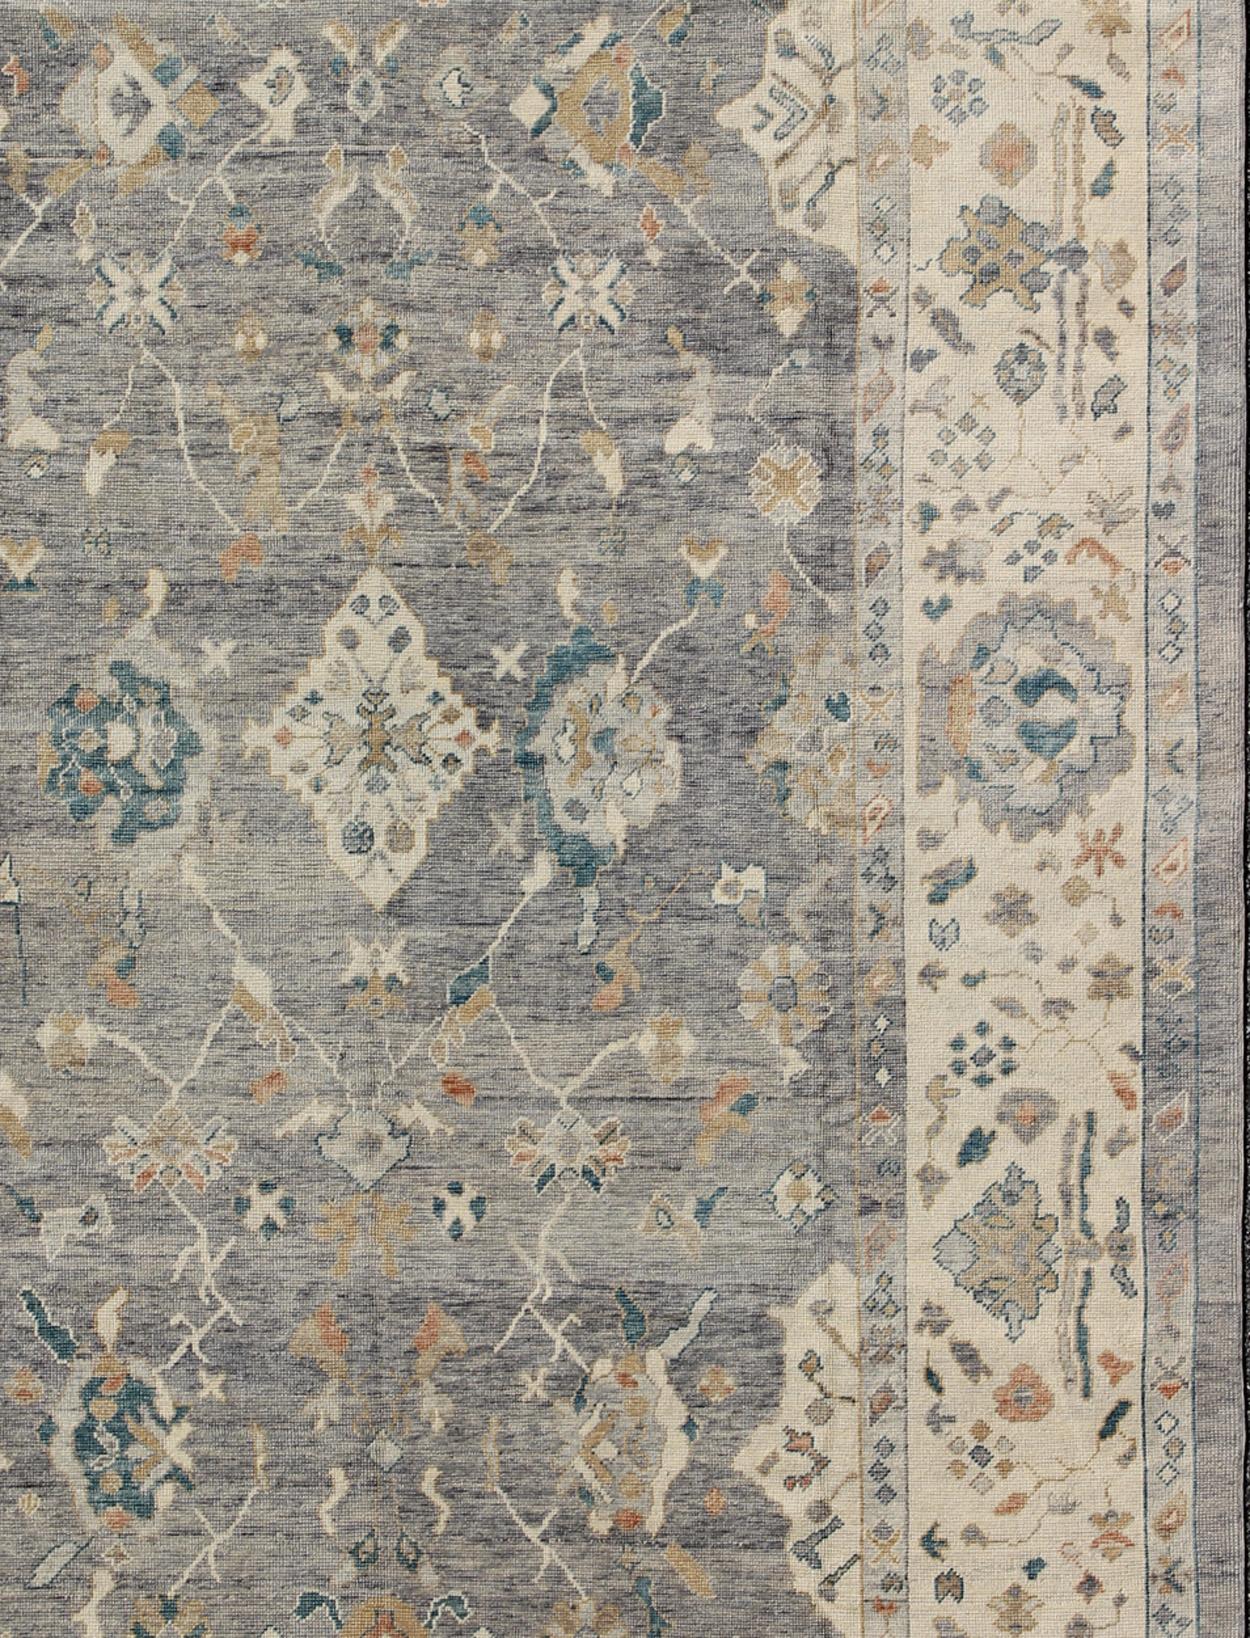 Turkish Oushak rug with bold design and color palette and all-over diamond medallion design, rug MSD-200, country of origin / type: Turkey / Oushak
Keivan Woven Arts 

This unique design Oushak rug from Turkey features a bold design with fun